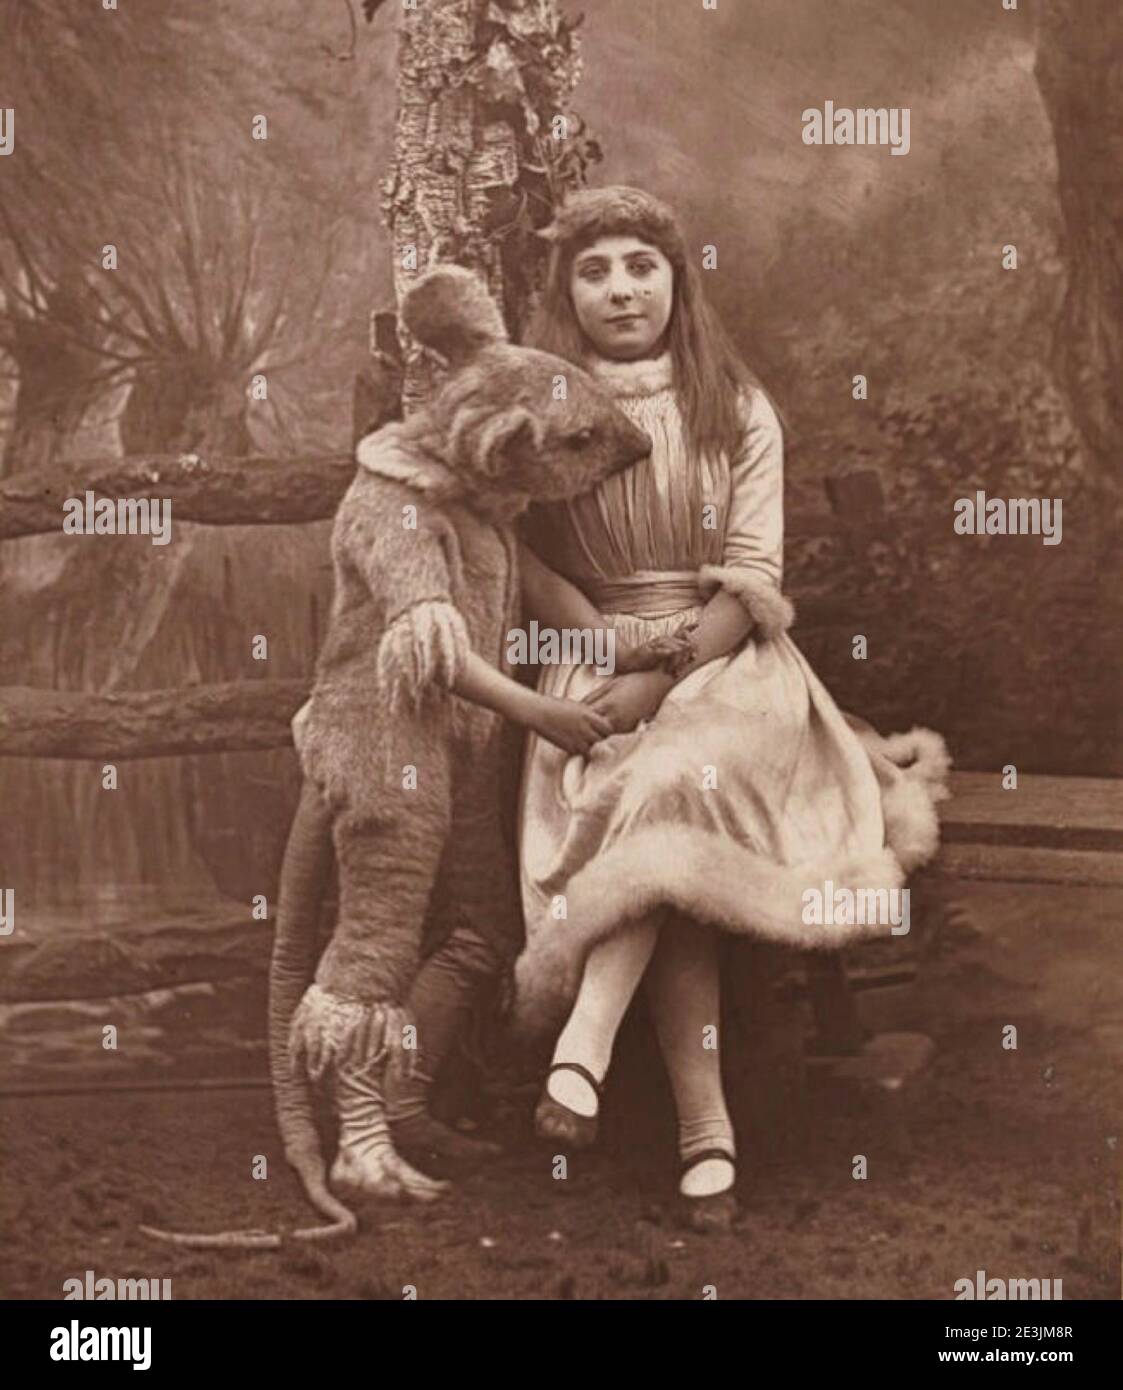 Phoebe Carlo as Alice in the pantomime Alice in Wonderland by the portrait photographer Herbert Rose Barraud. Alice poses with the dormouse on stage. Stock Photo